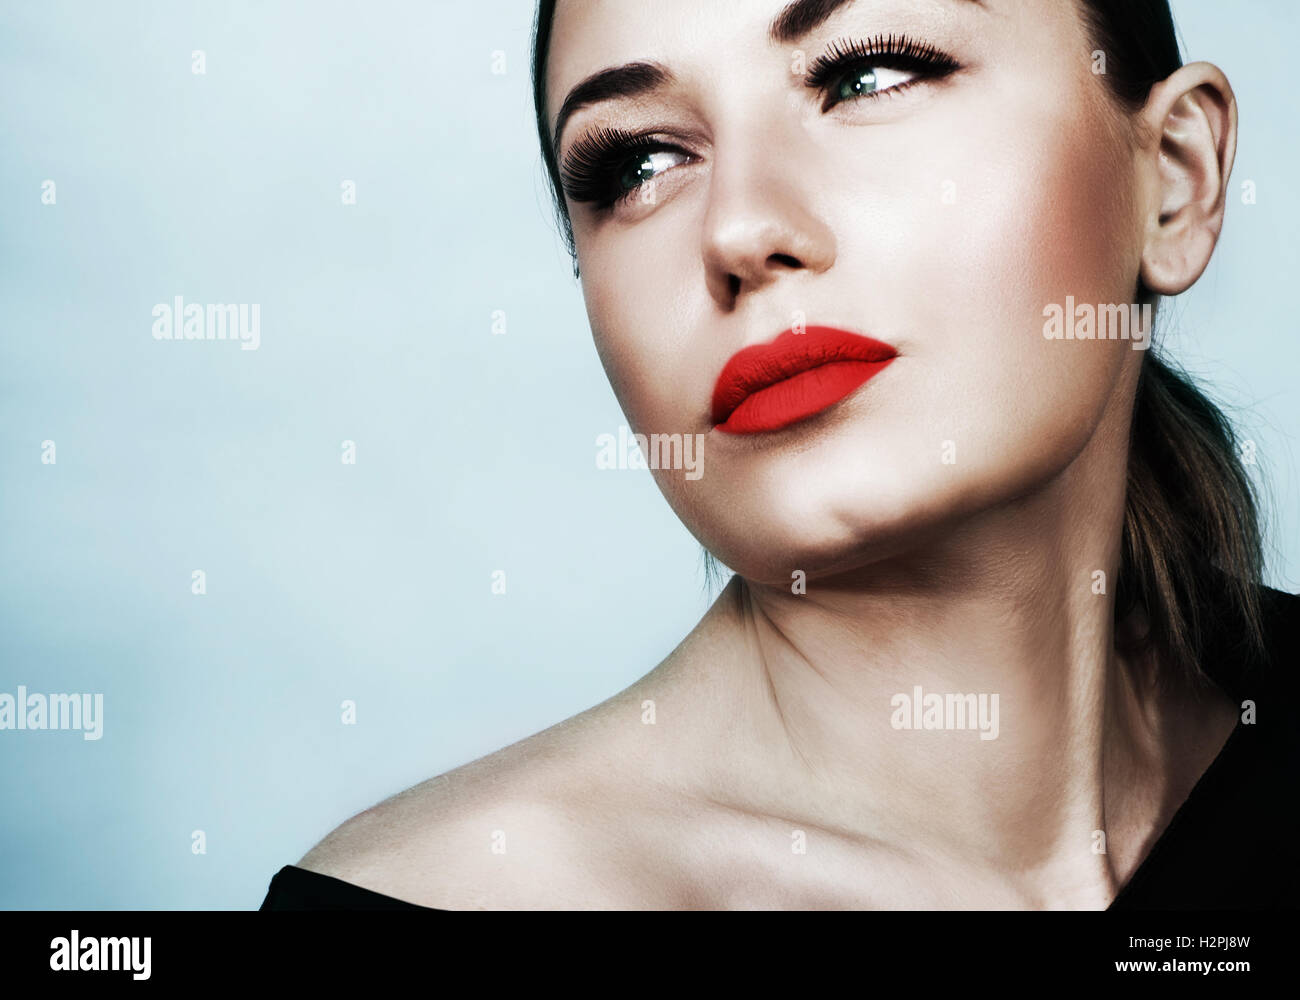 Closeup portrait of a beautiful woman over blue background, attractive model with sexy red lips and perfect evening makeup Stock Photo